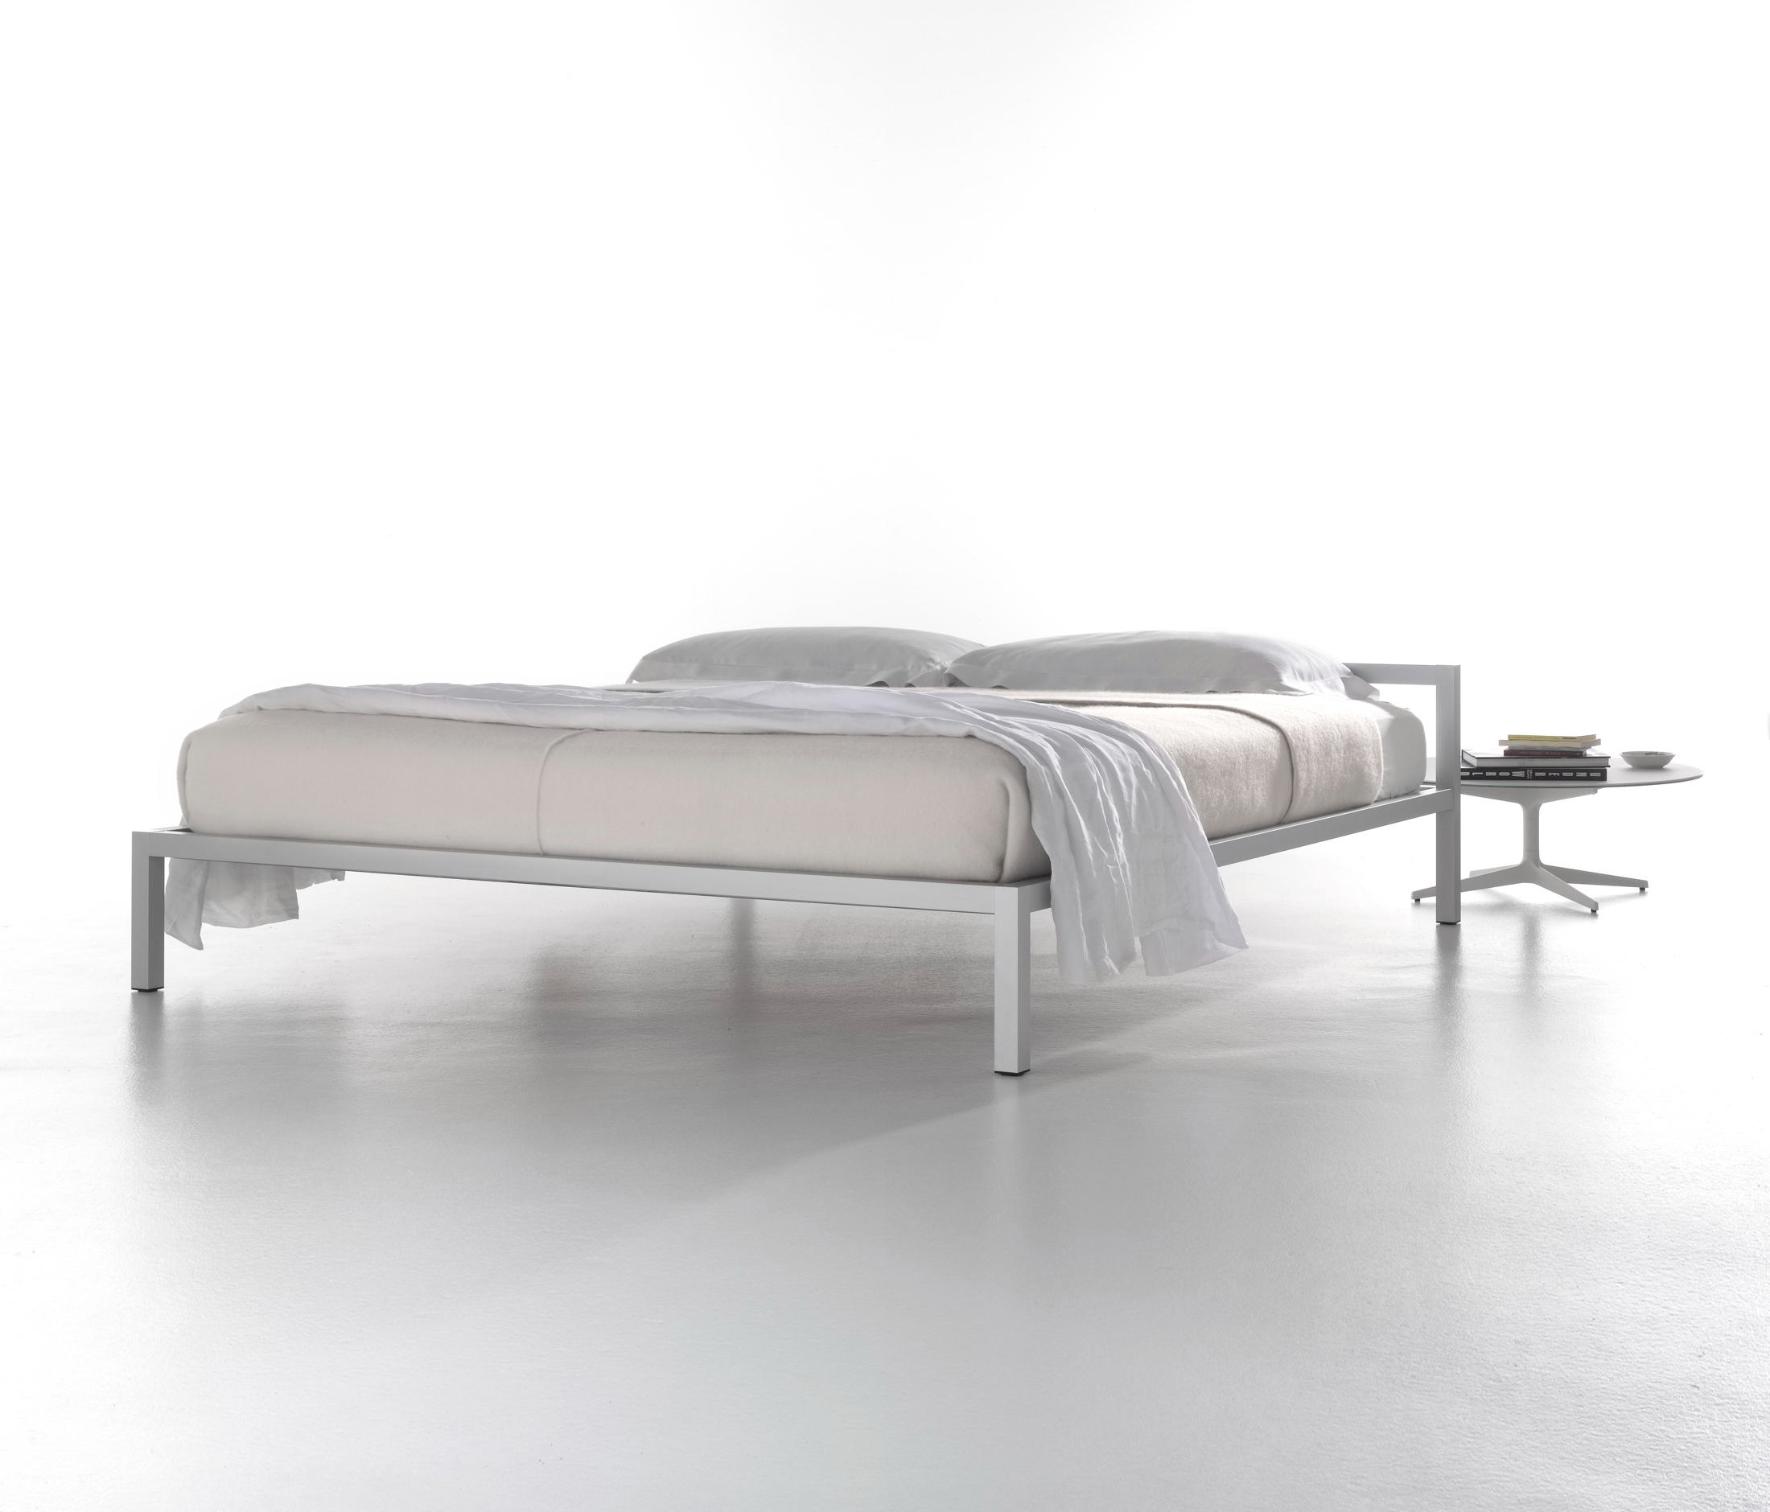 Aluminium Bed with Italian Precision ☞ Structure: Gloss Painted Black X061 ☞ Dimensions: 160 x 210 cm